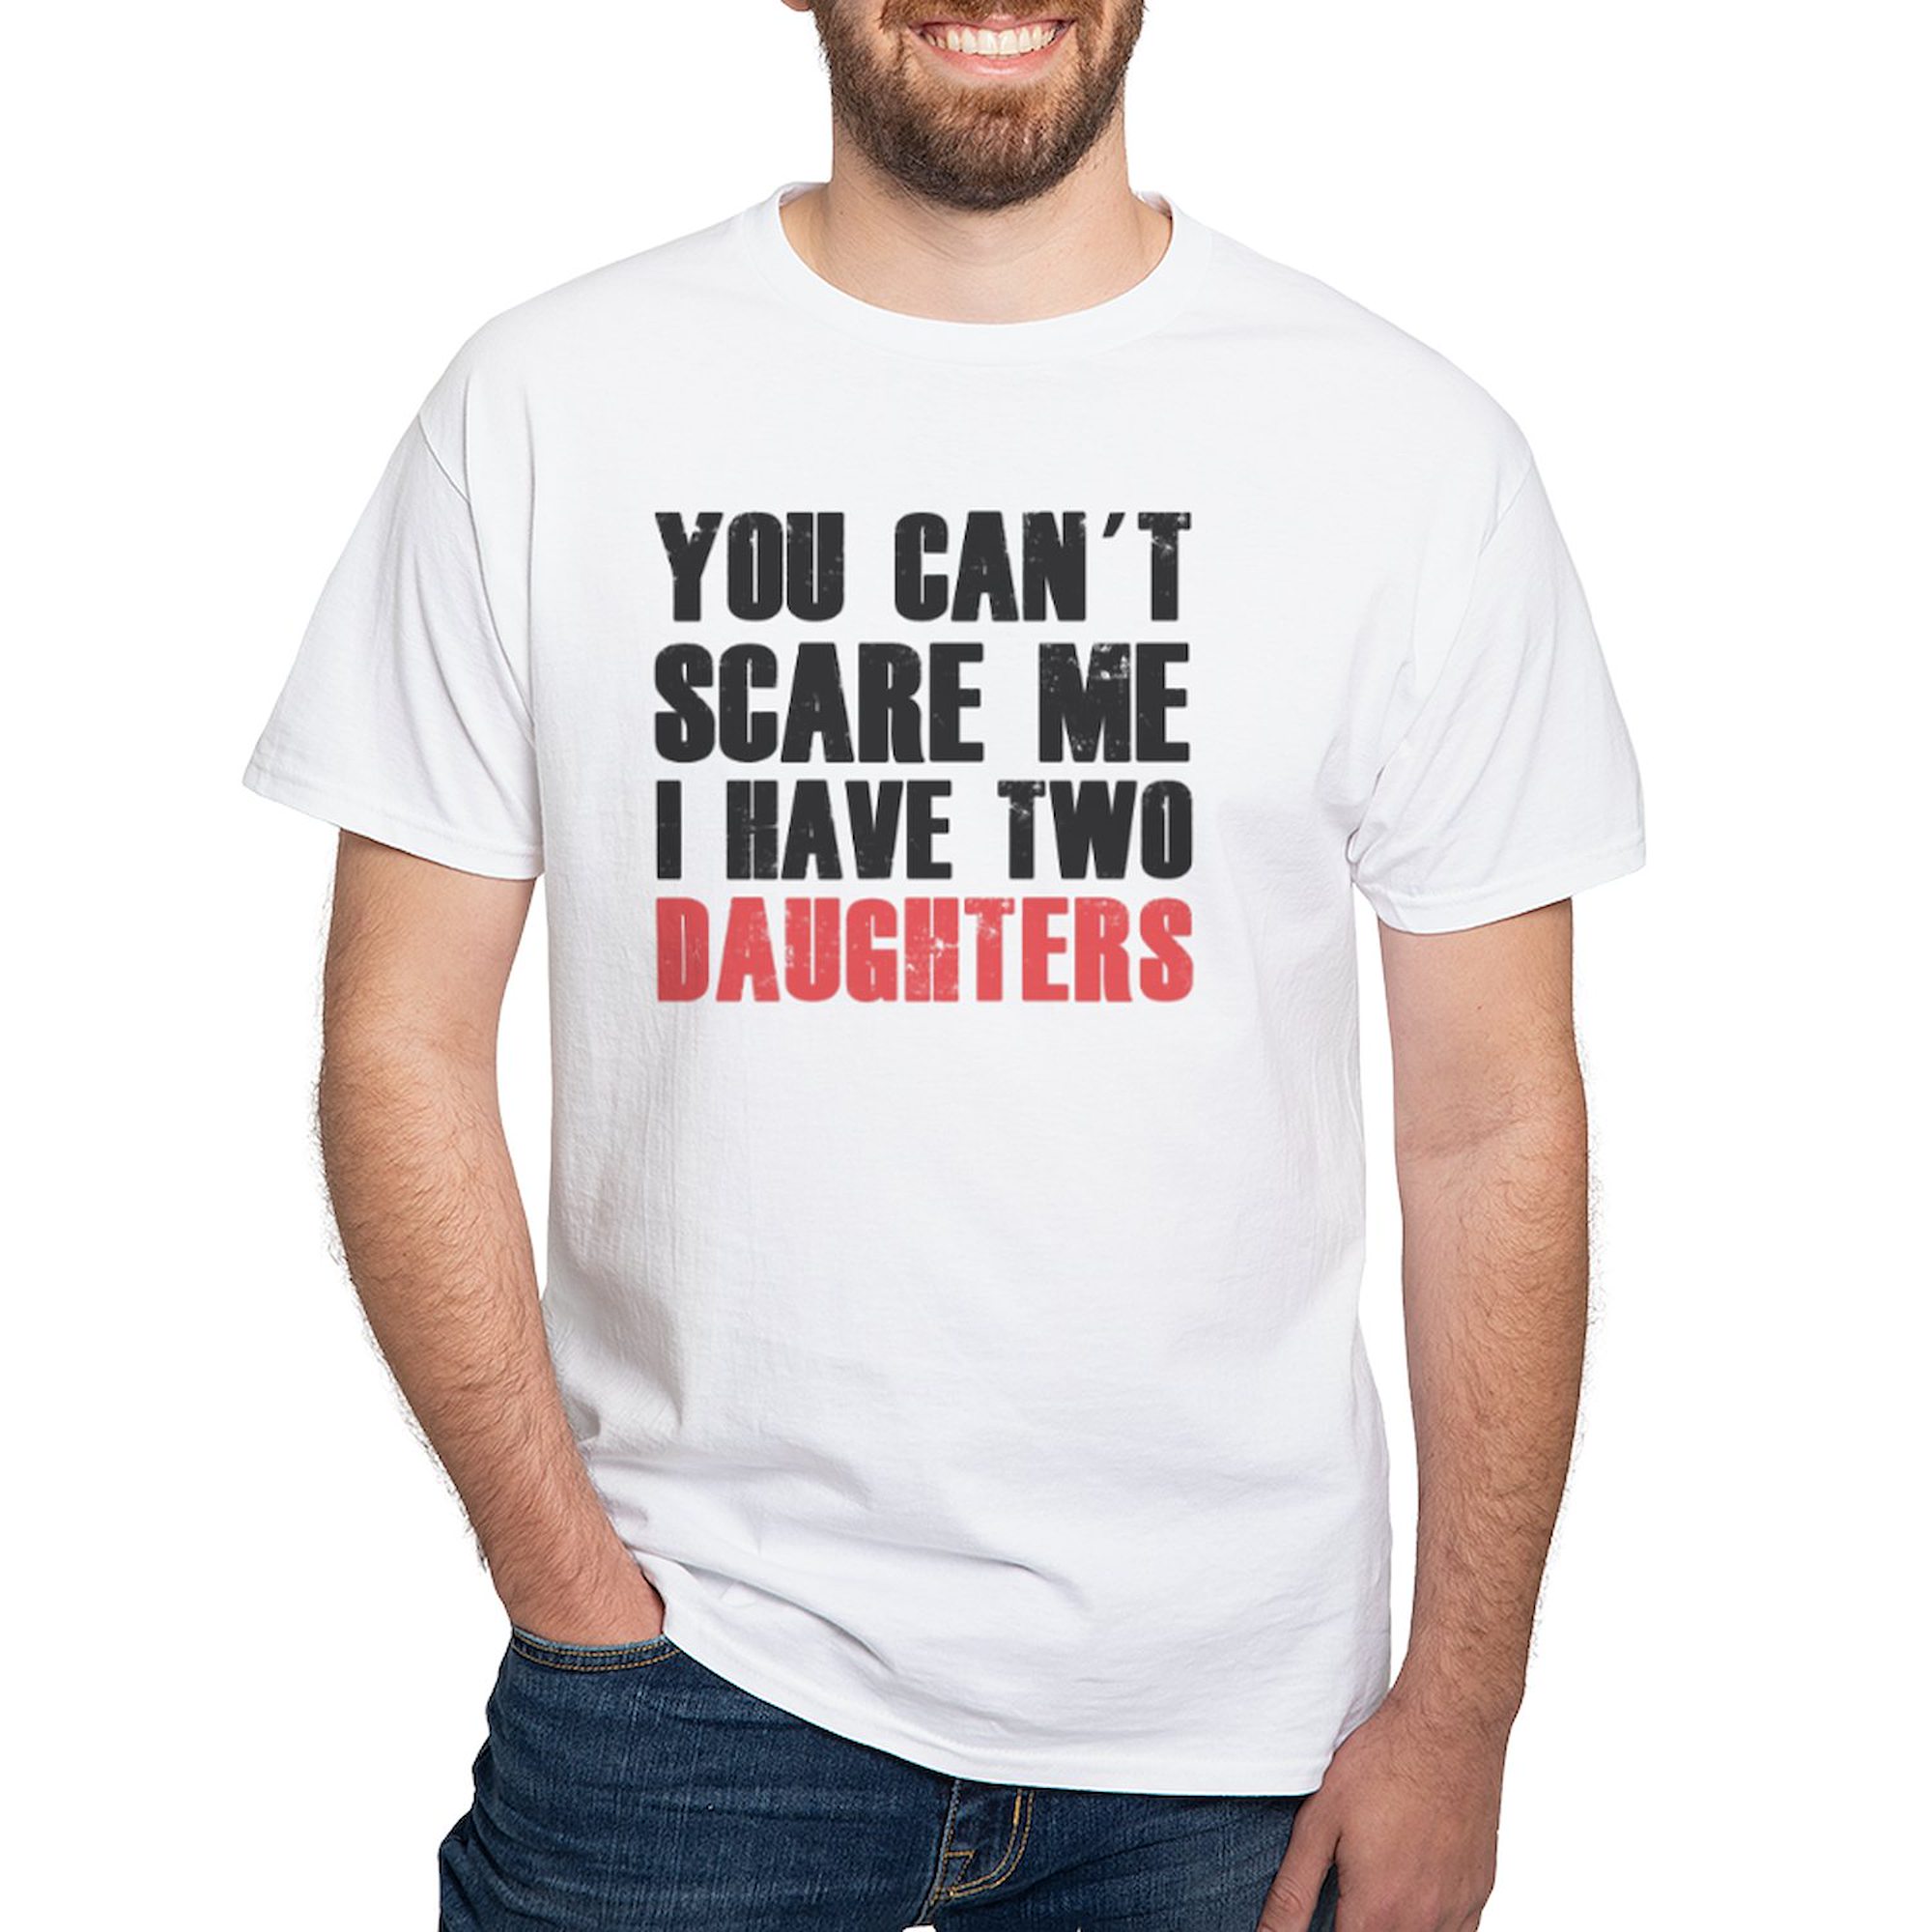 CafePress - I Have Two Daughters White T Shirt - Men's Classic T-Shirts - image 1 of 4